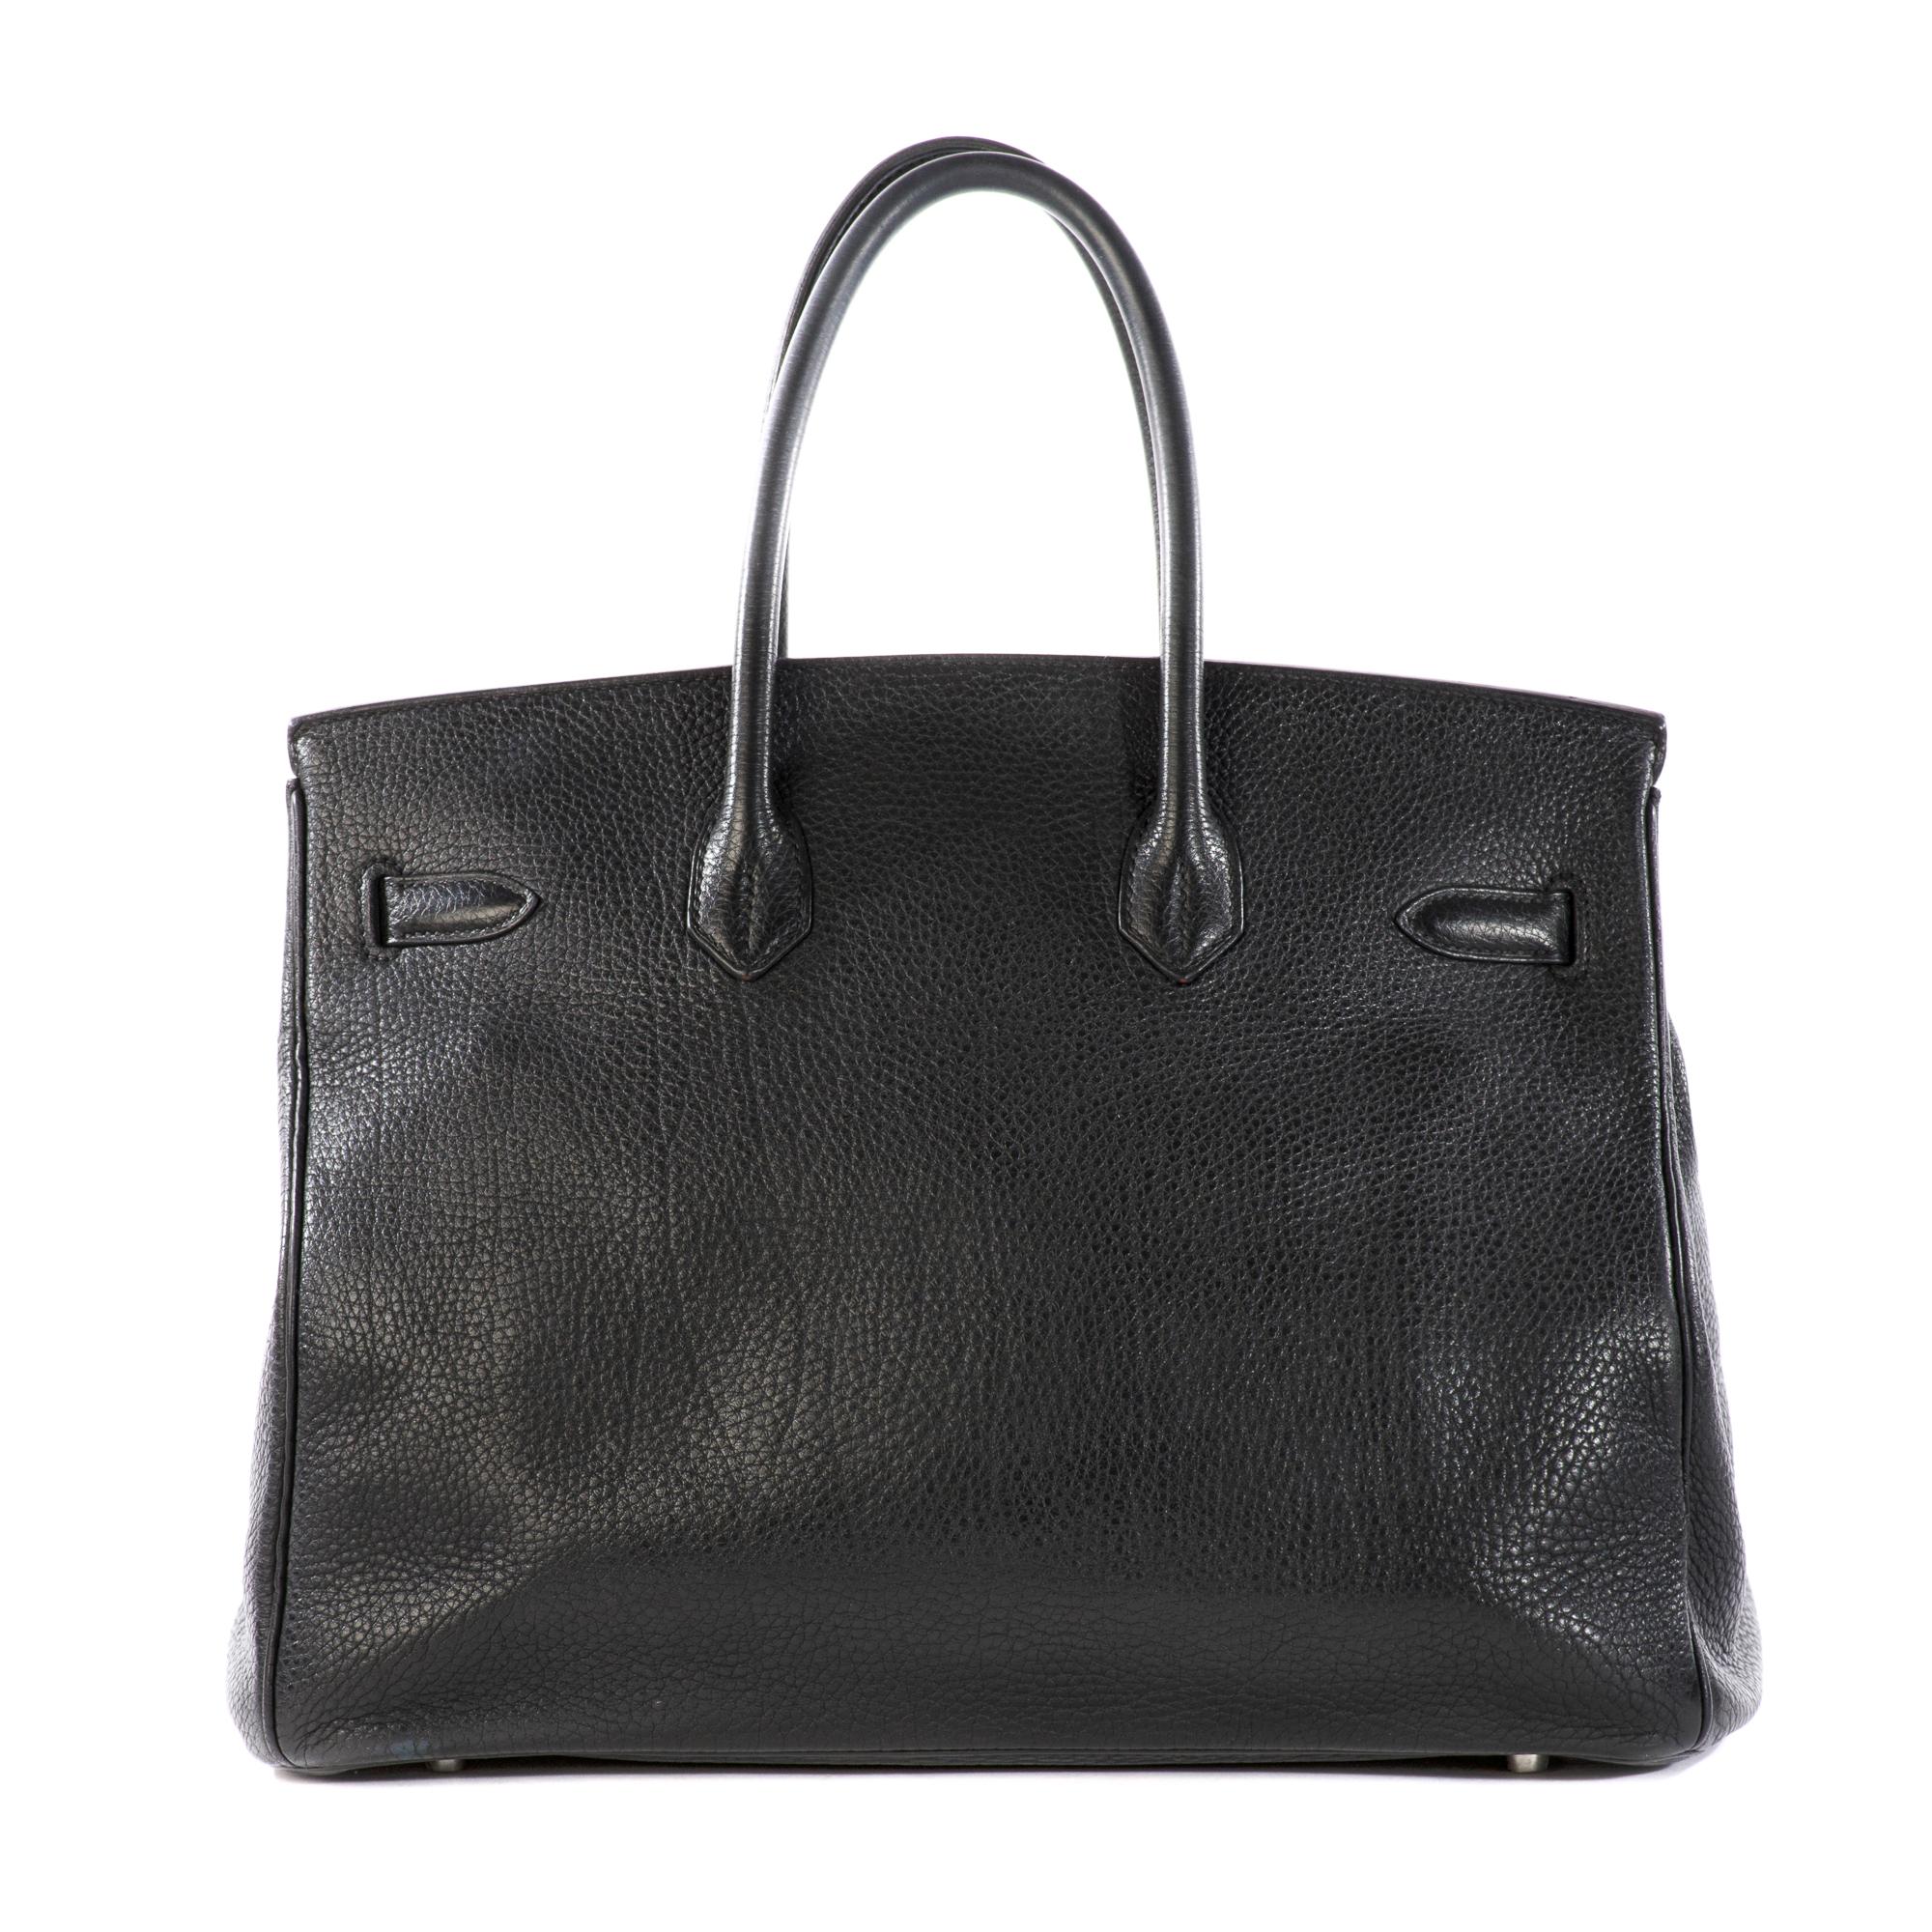 Authentic HERMES Togo Birkin 35 Black. This stylish tote is beautifully crafted of textured togo calfskin leather in black. The luxurious handbag features rolled leather top handles, a front flap, and strap closure with gold hardware including a